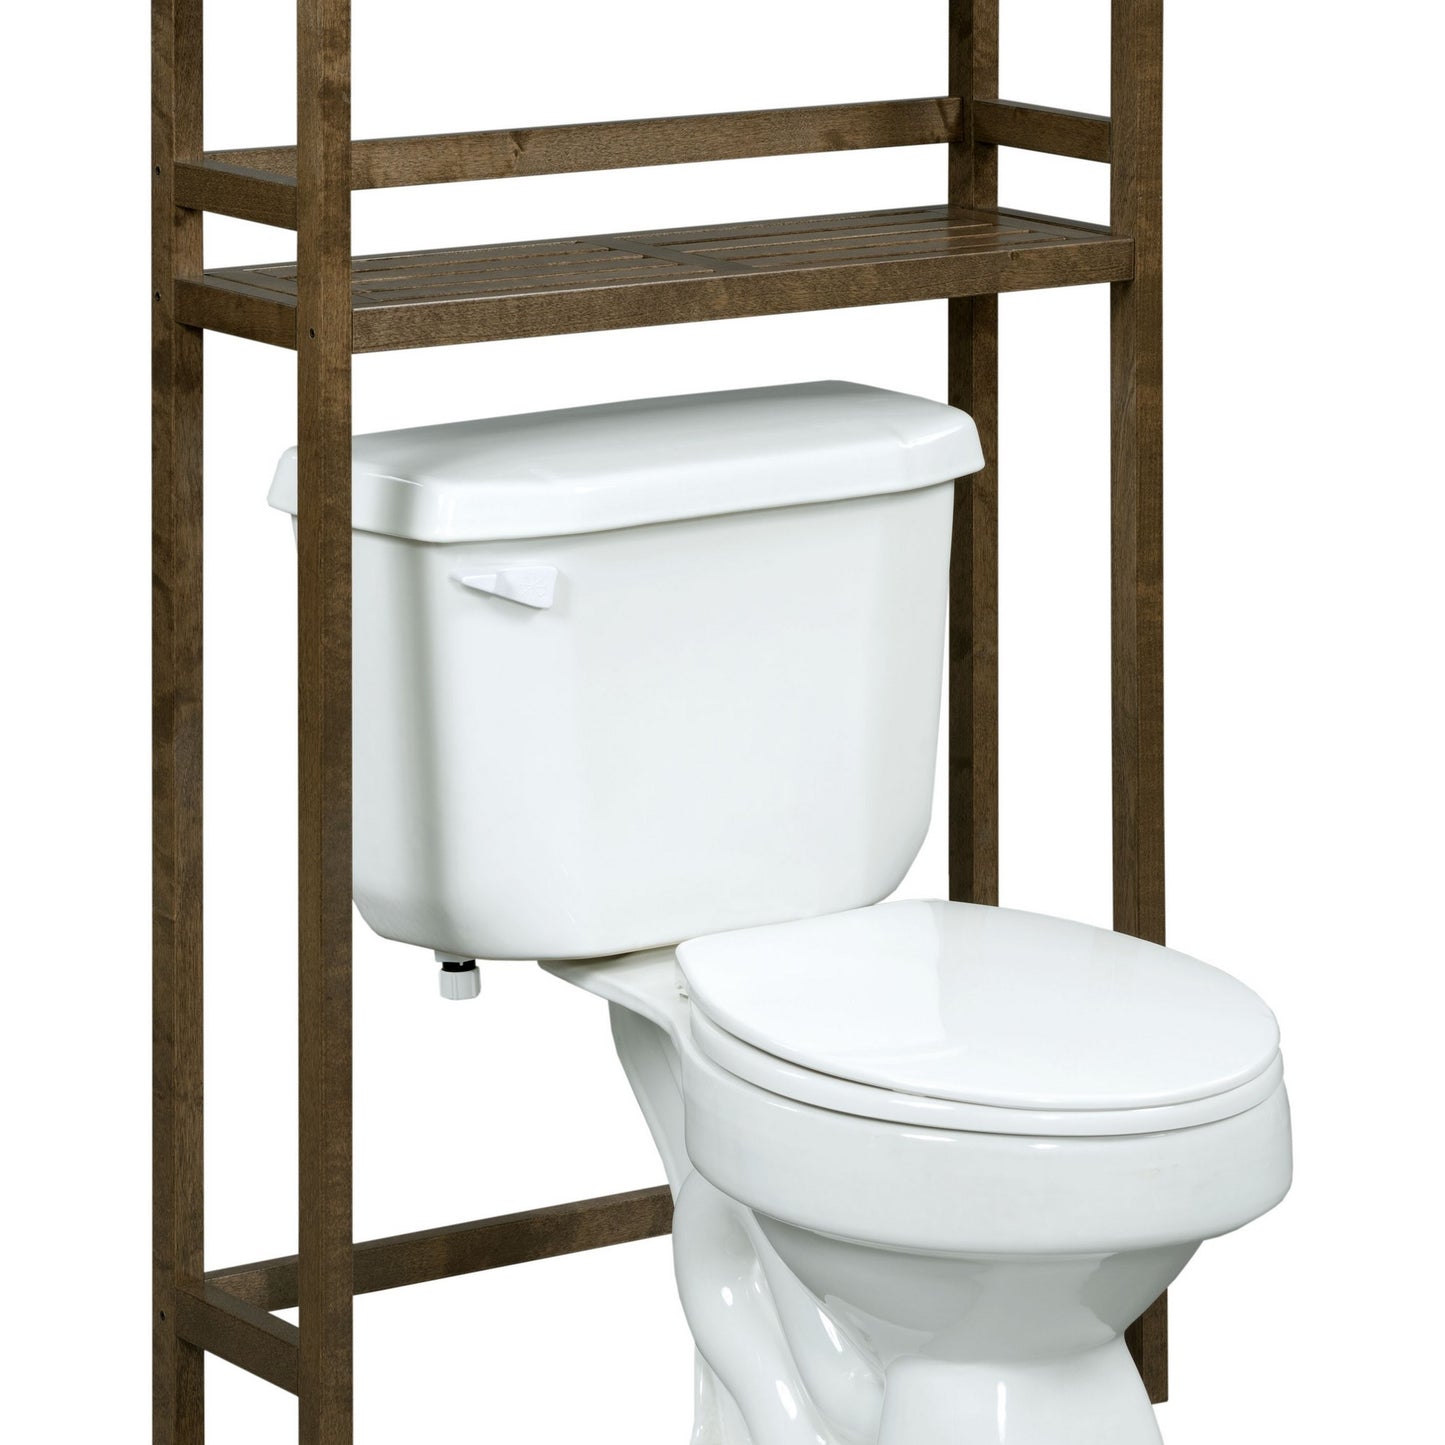 48" Chestnut Finish 2 Tier Solid Wood Over Toilet Organizer